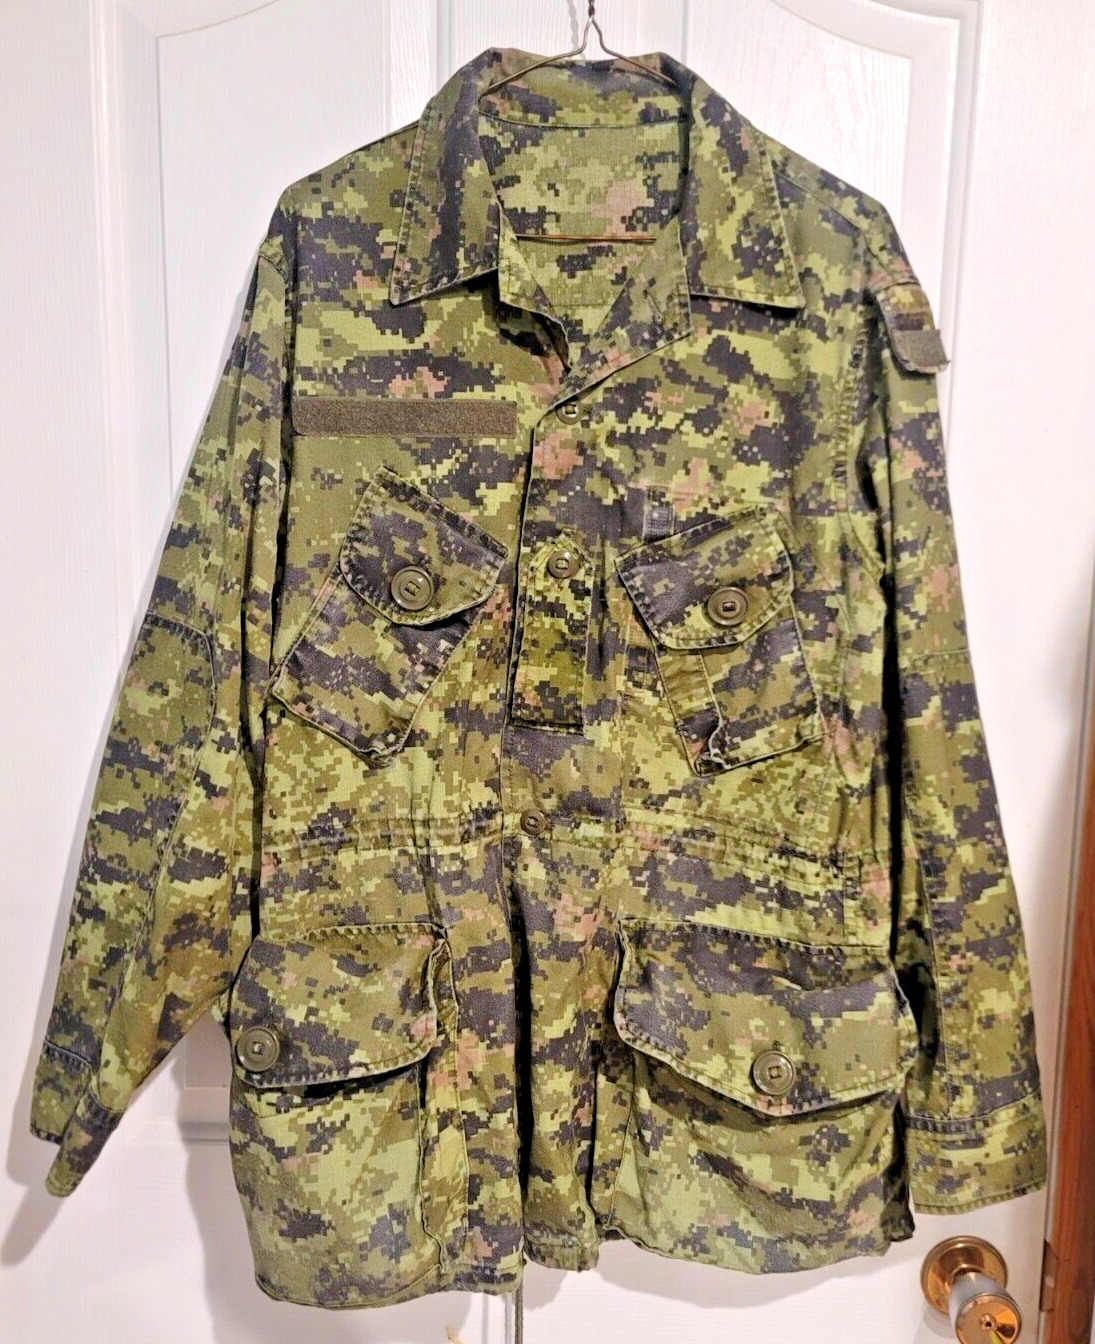 CANADIAN ARMY CADPAT DIGITAL TEMPERATE CAMOUFLAGE CAMO SHIRT 7040 REG-LG OBSOLET